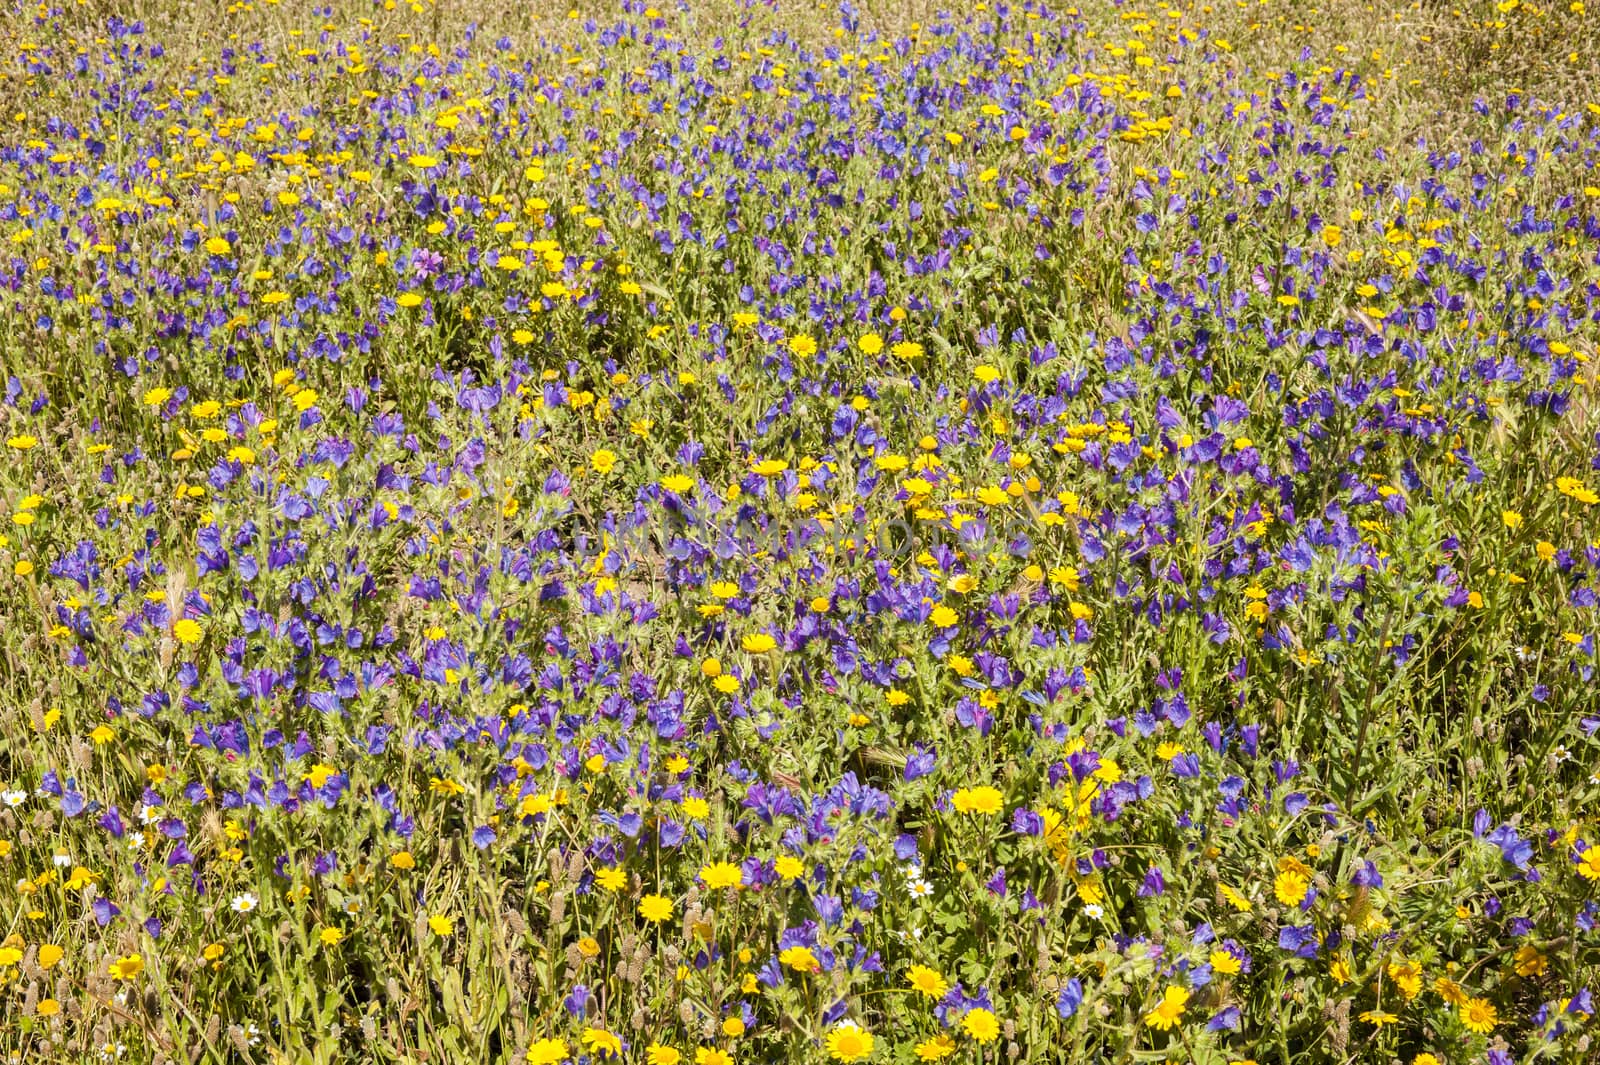 Grass field with blue and yellow flowers in full bloom in Spring